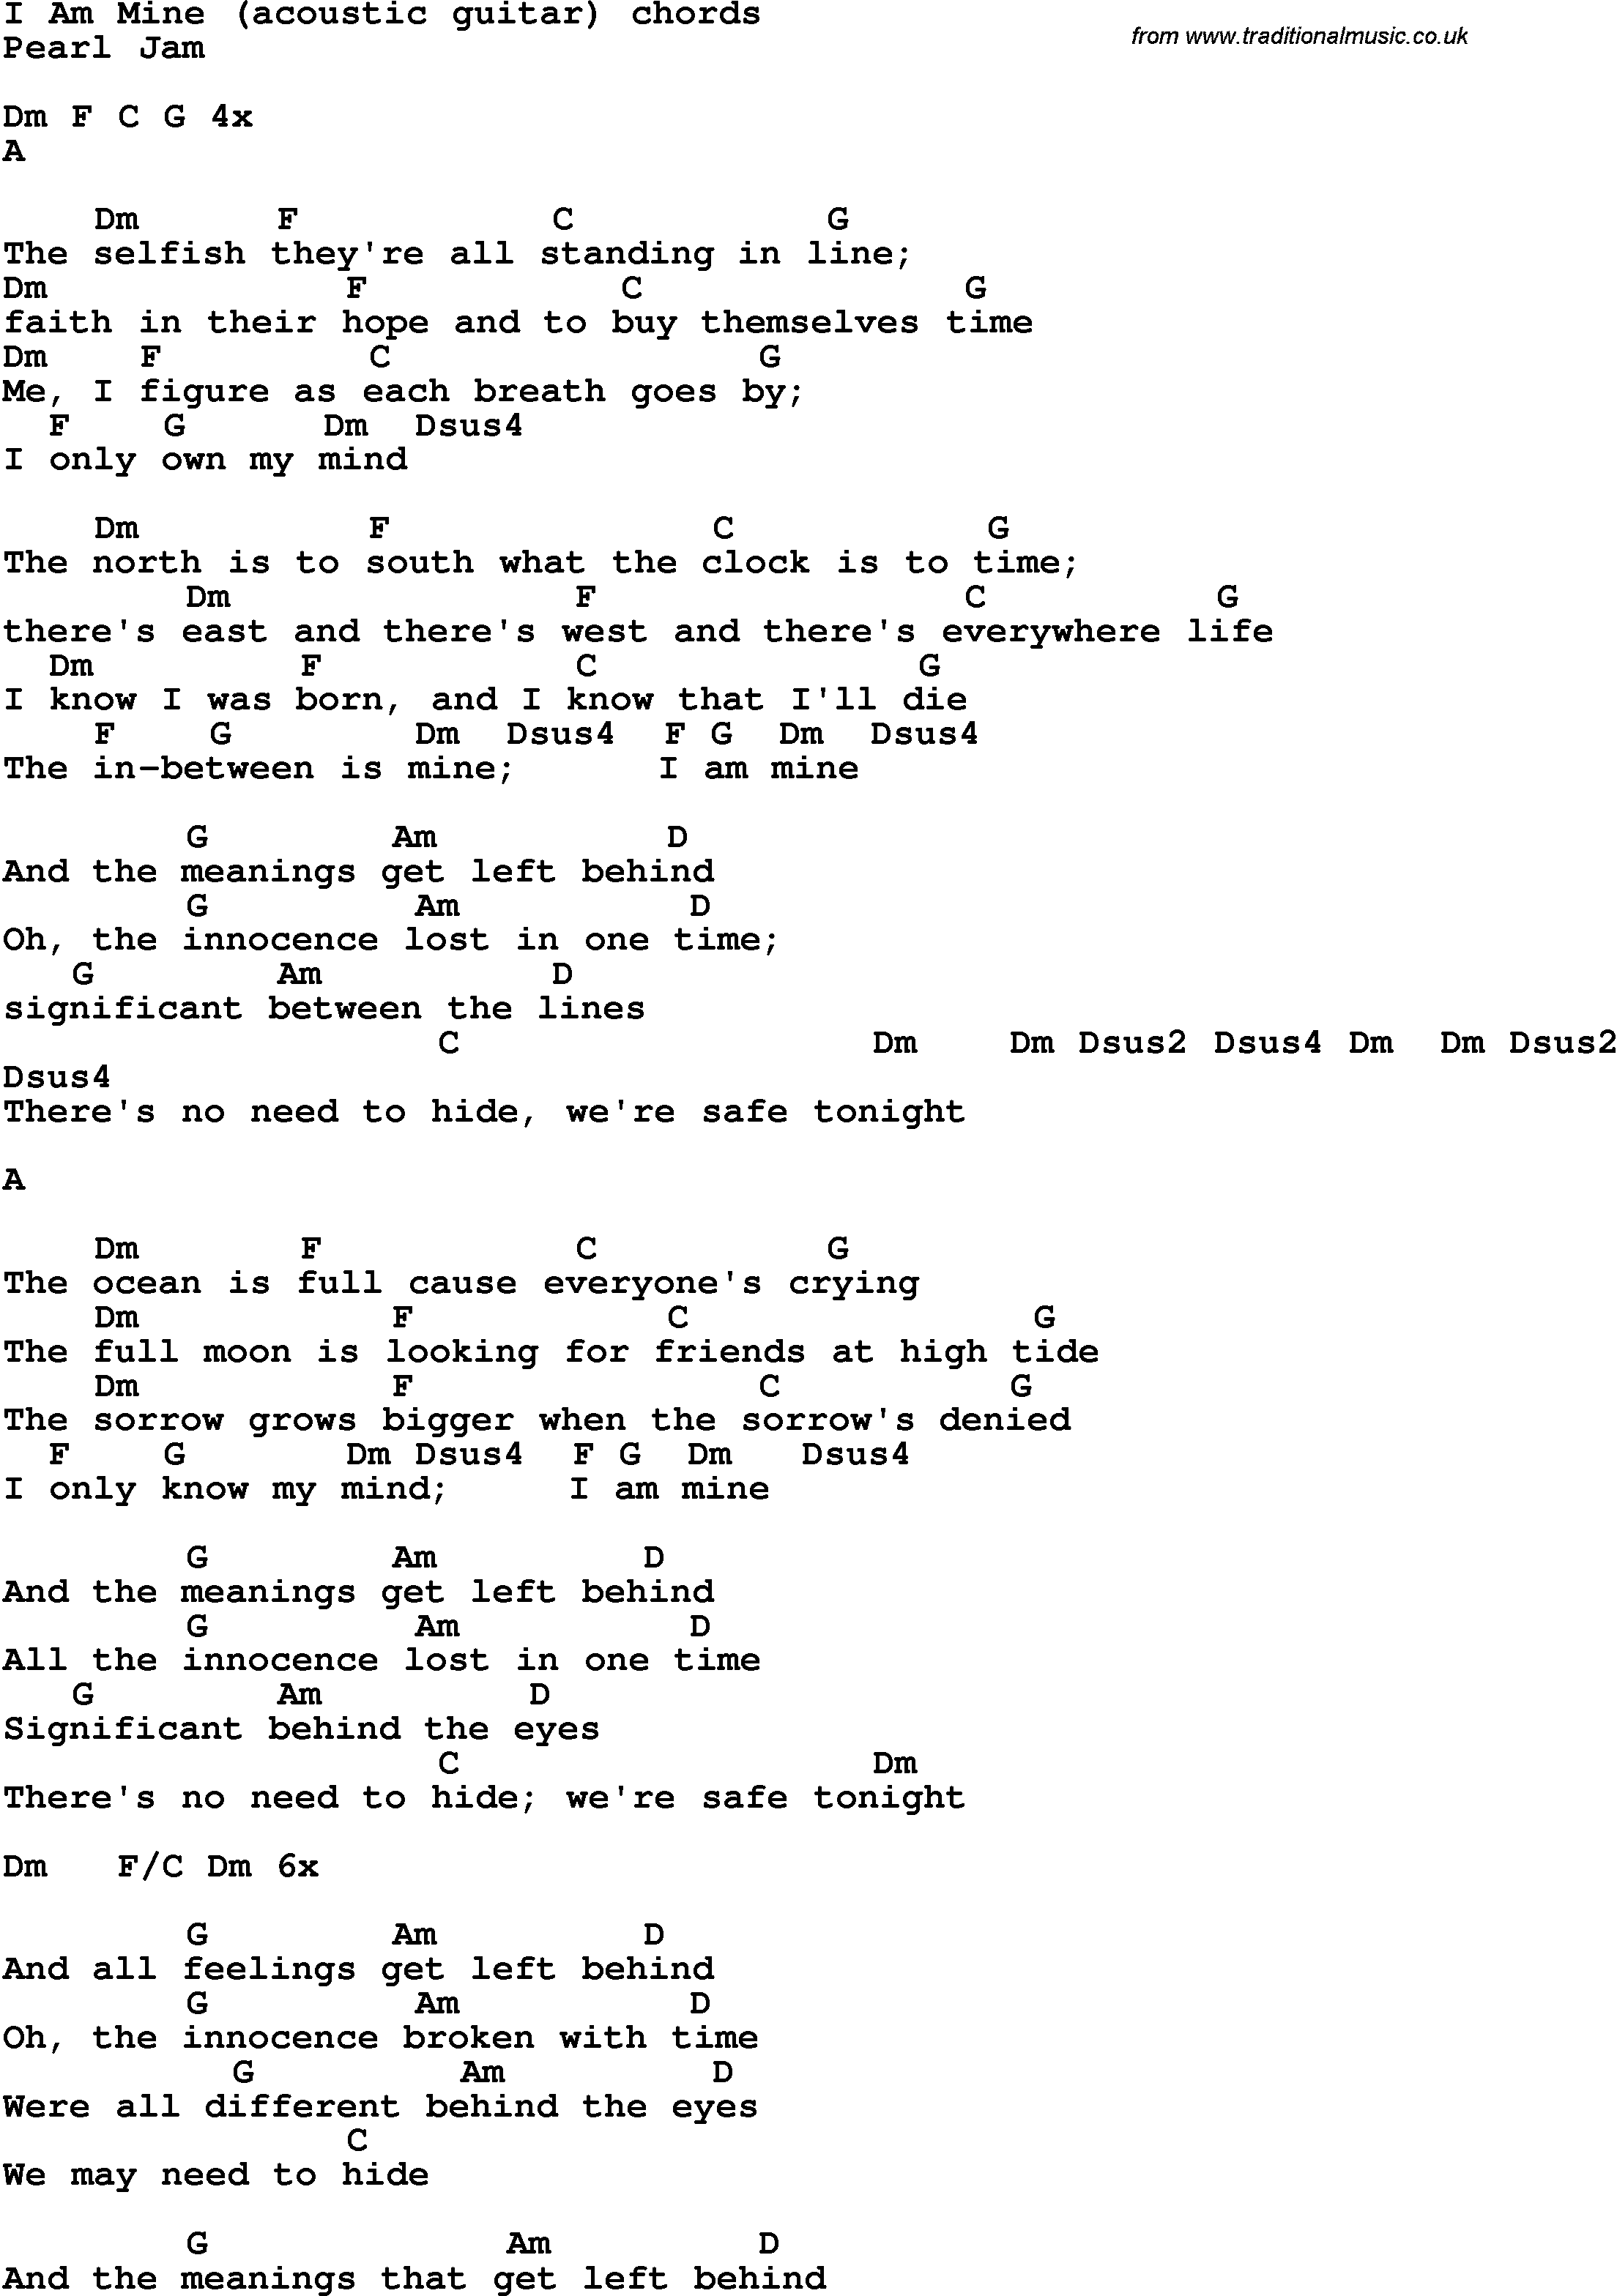 Song Lyrics with guitar chords for I Am Mine